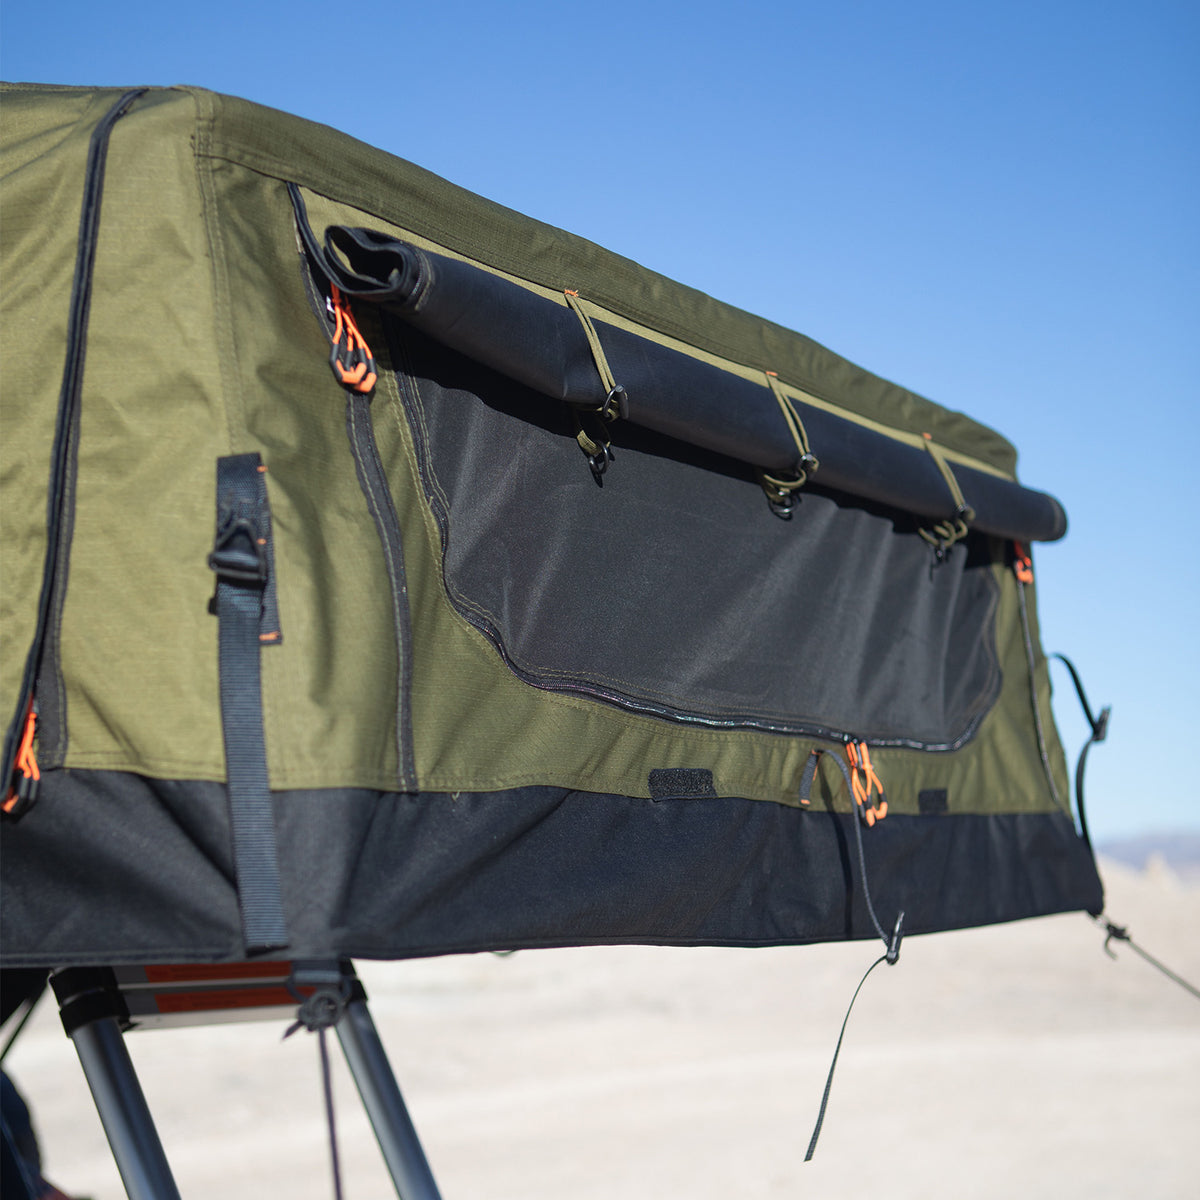 23ZERO Walkabout 72&quot; 2.0 4-Person Roof Top Tent